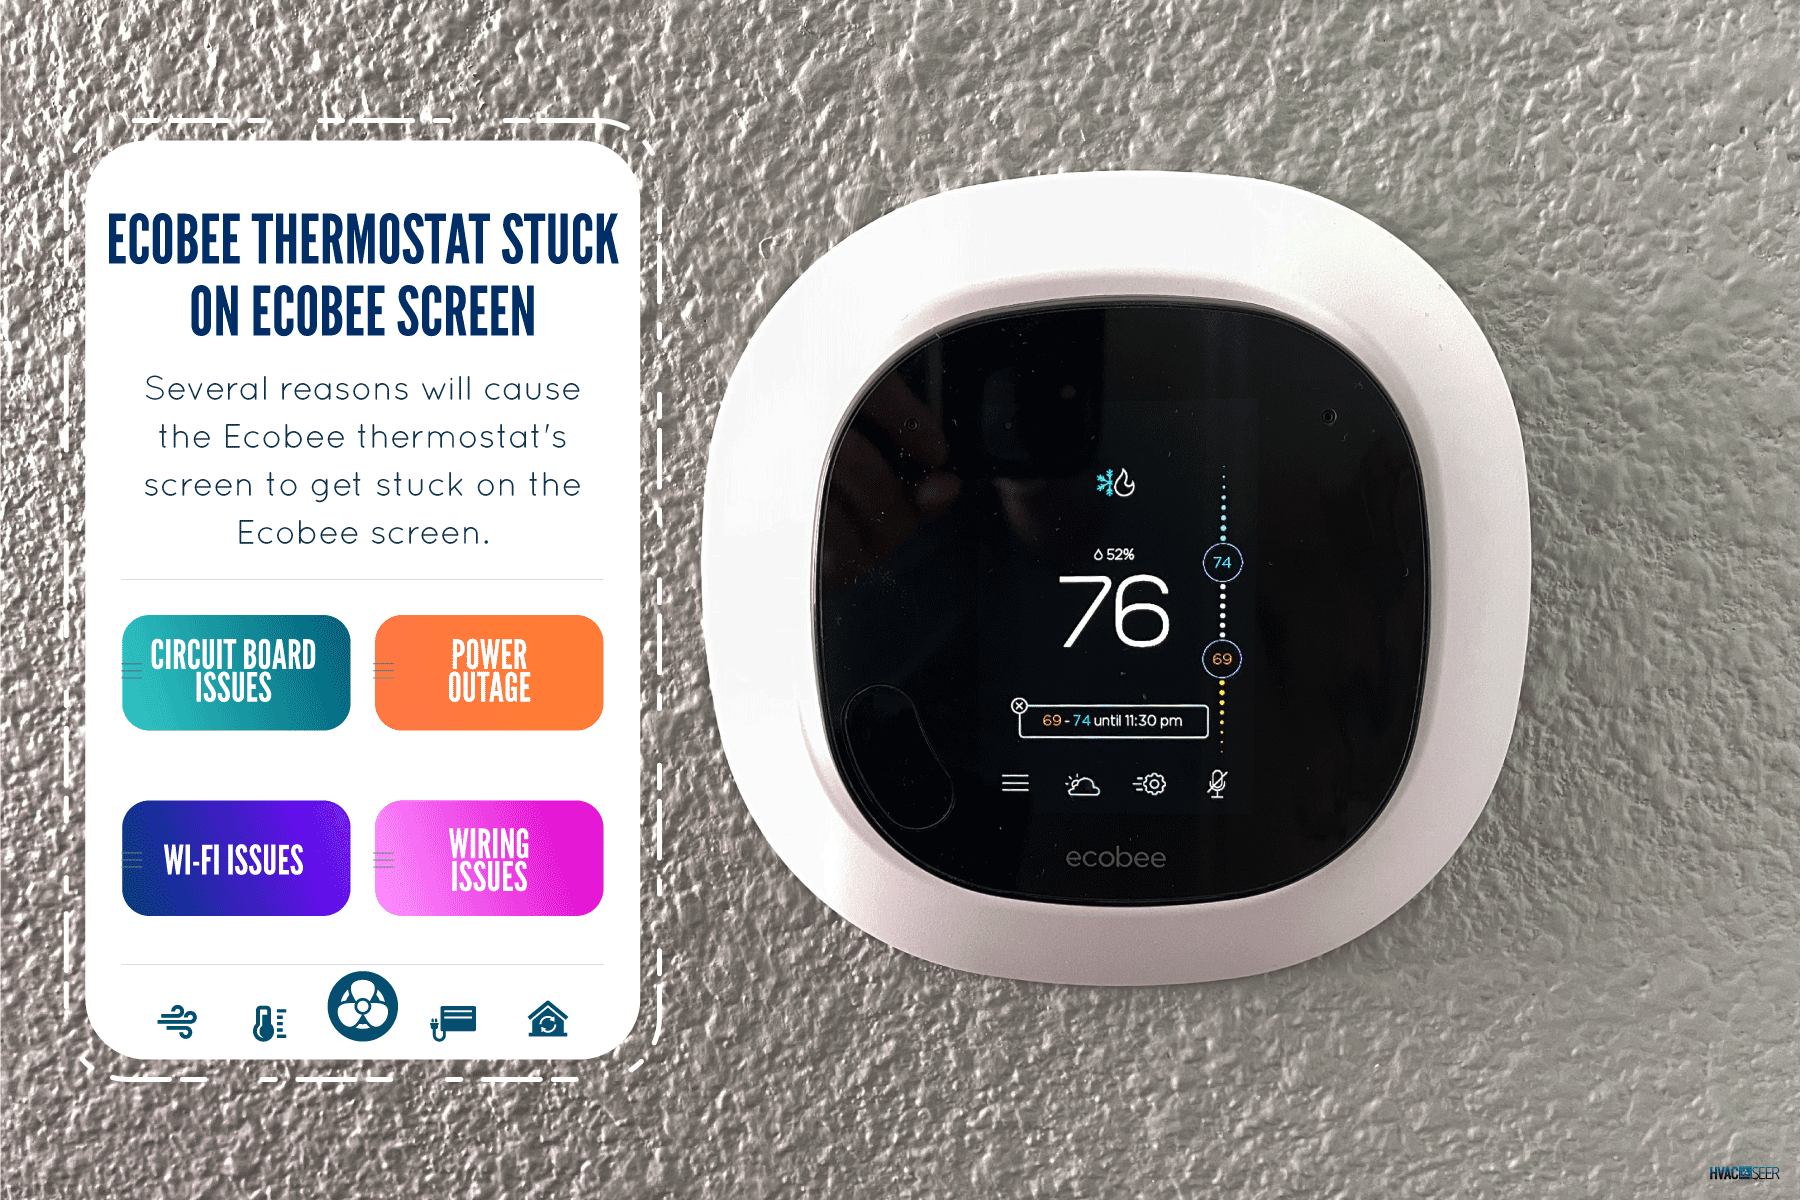 An Ecobee smart thermostat in a home, Ecobee Thermostat Stuck On Ecobee Screen - Why And What To Do